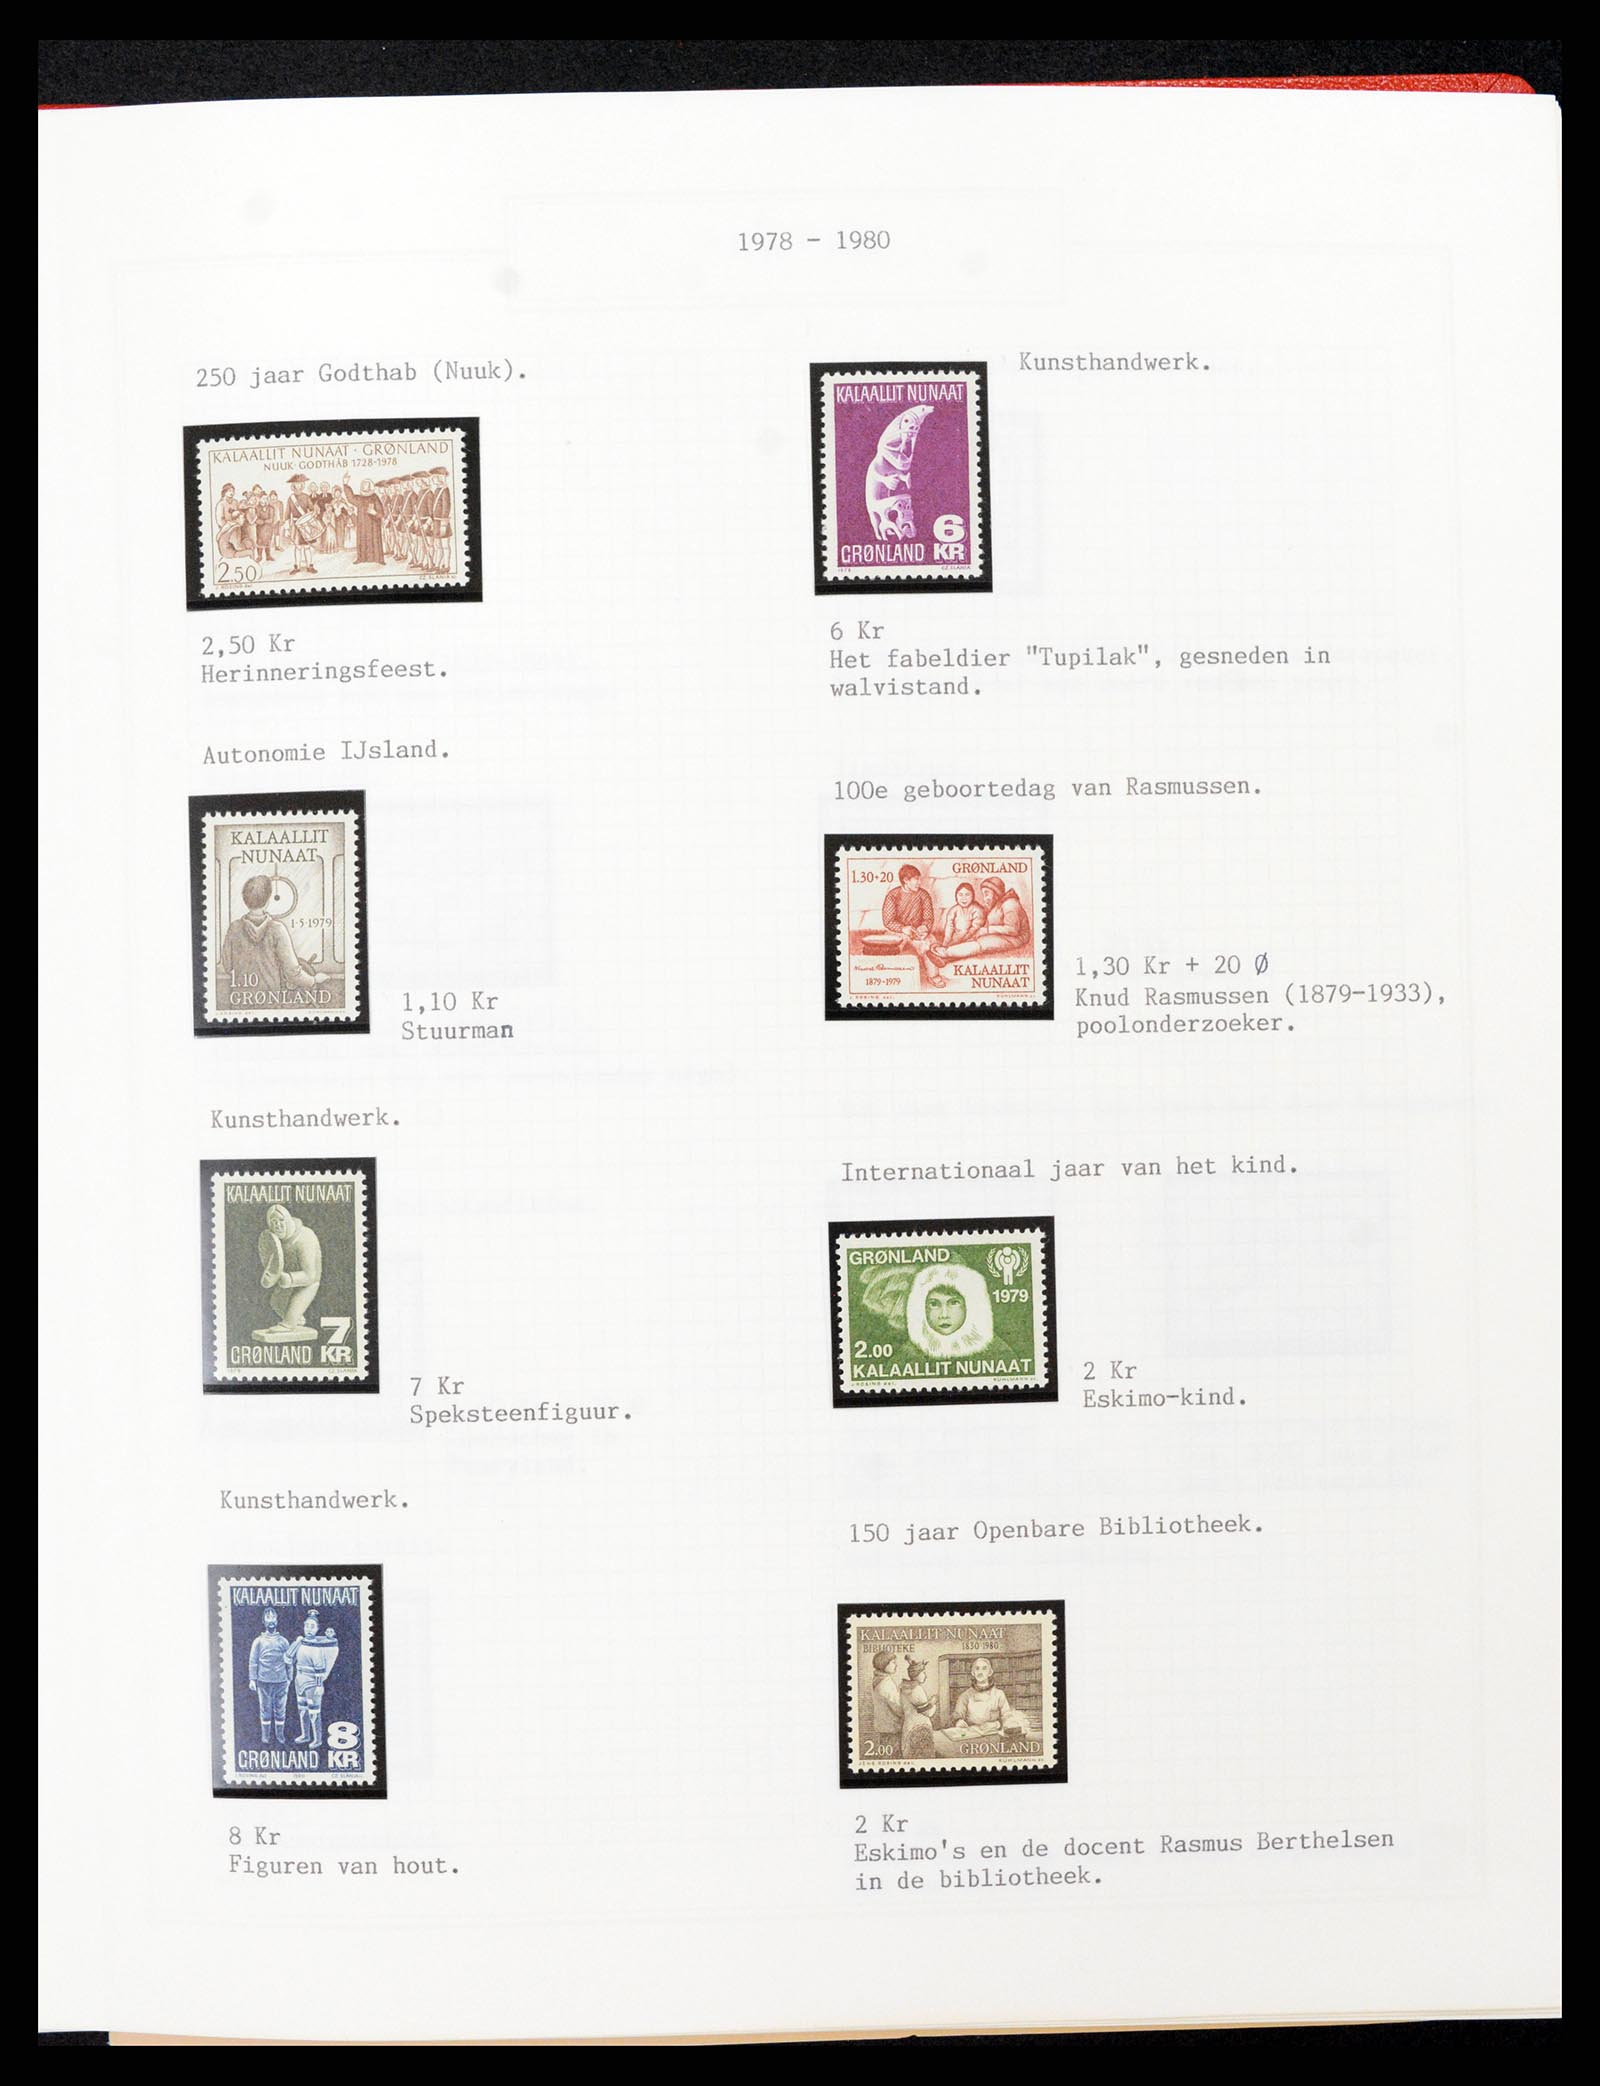 37302 063 - Stamp collection 37302 Greenland and Faroe Islands 1905-2001.